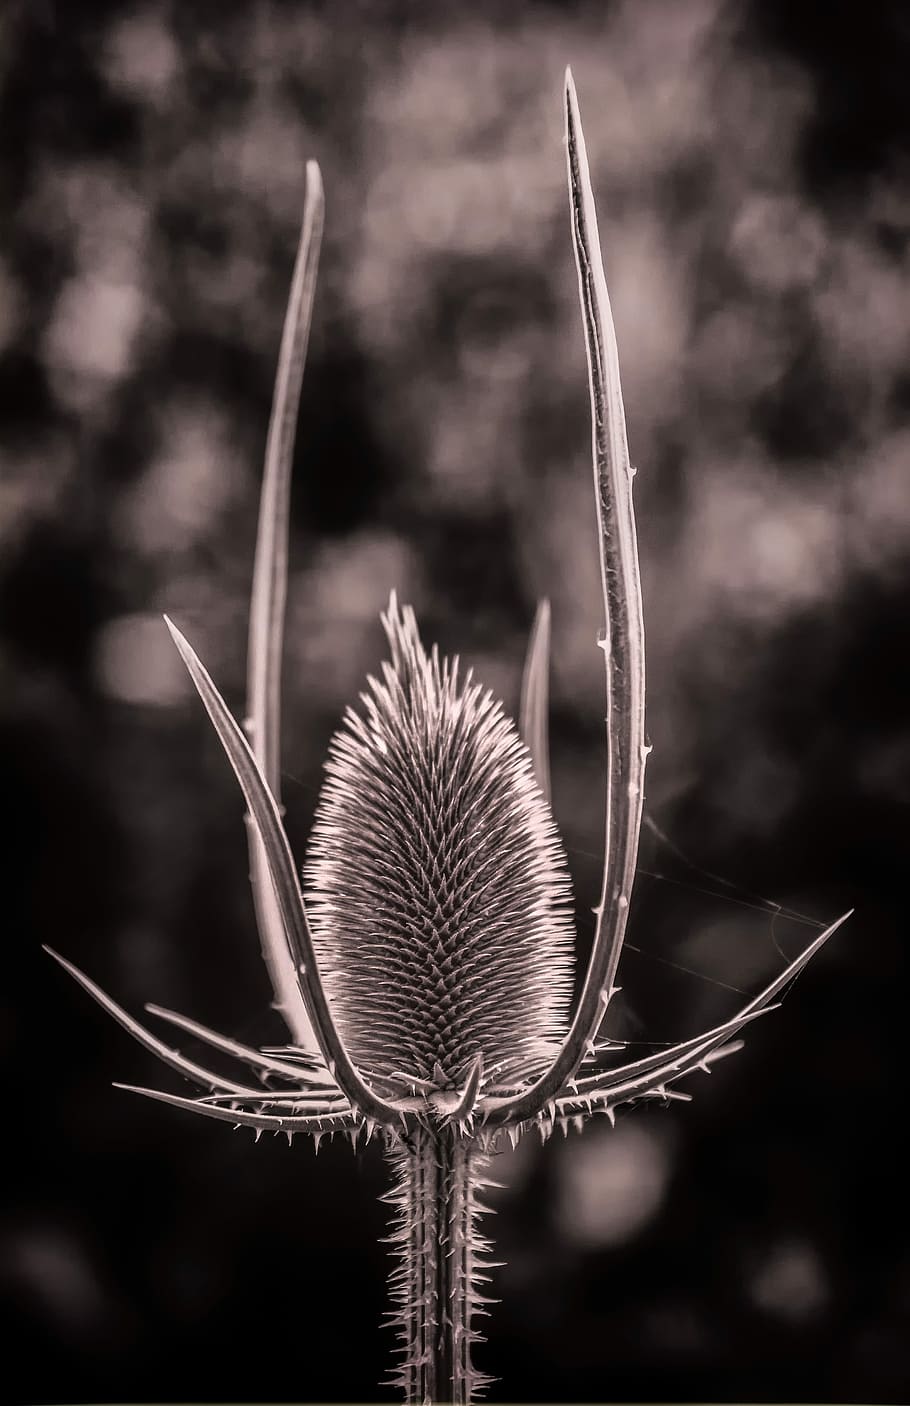 grayscale, selective, photography, sea holly flower, nature, plant, wild teasel, botany, blossom, bloom